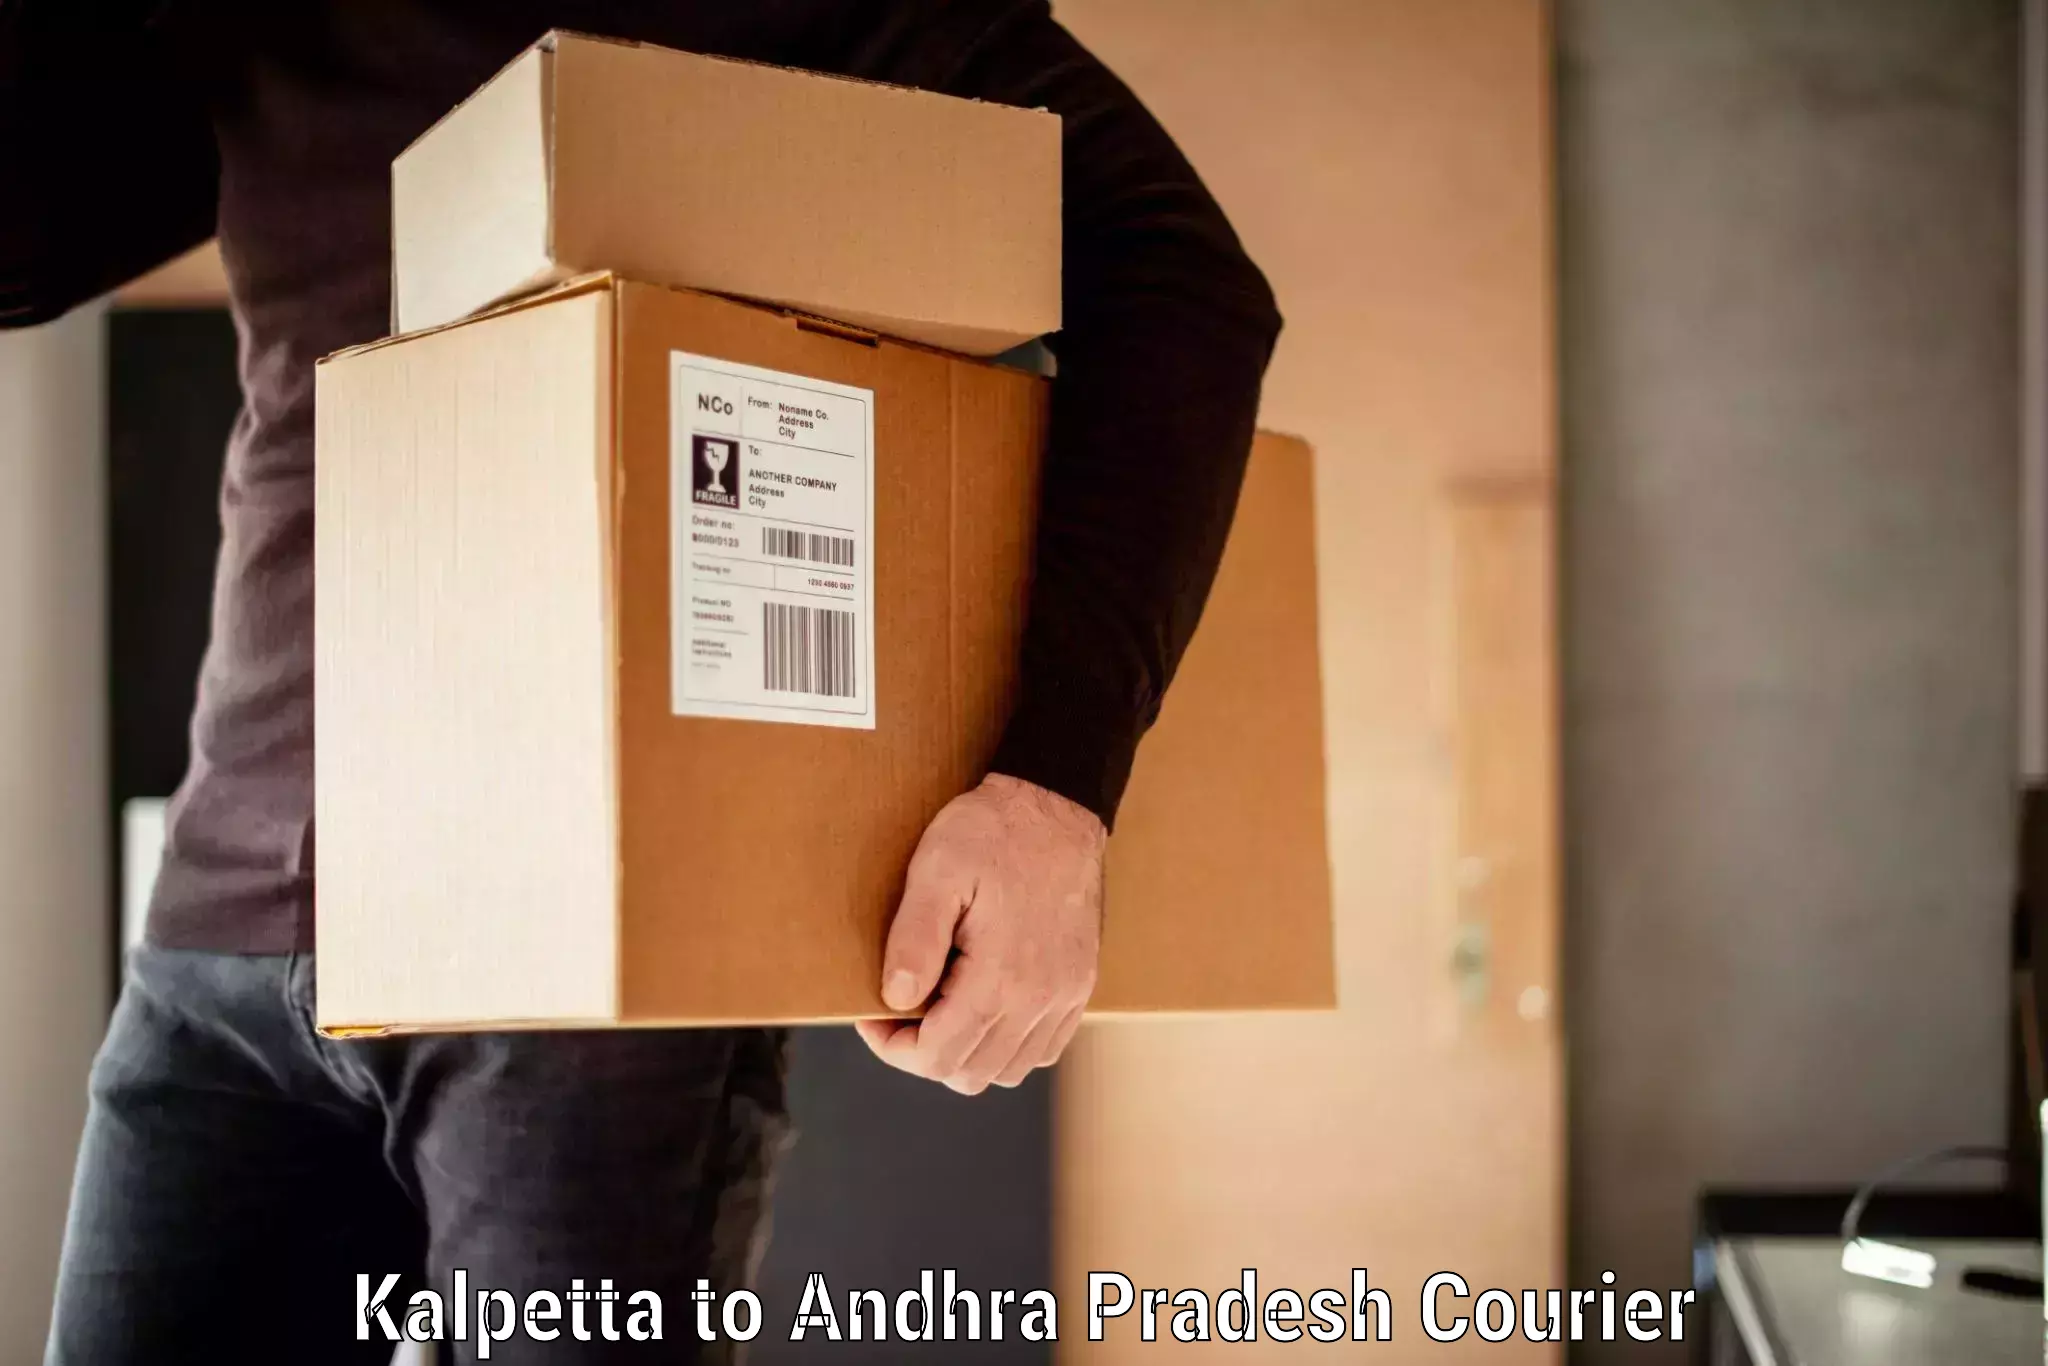 Baggage shipping experience in Kalpetta to Visakhapatnam Port